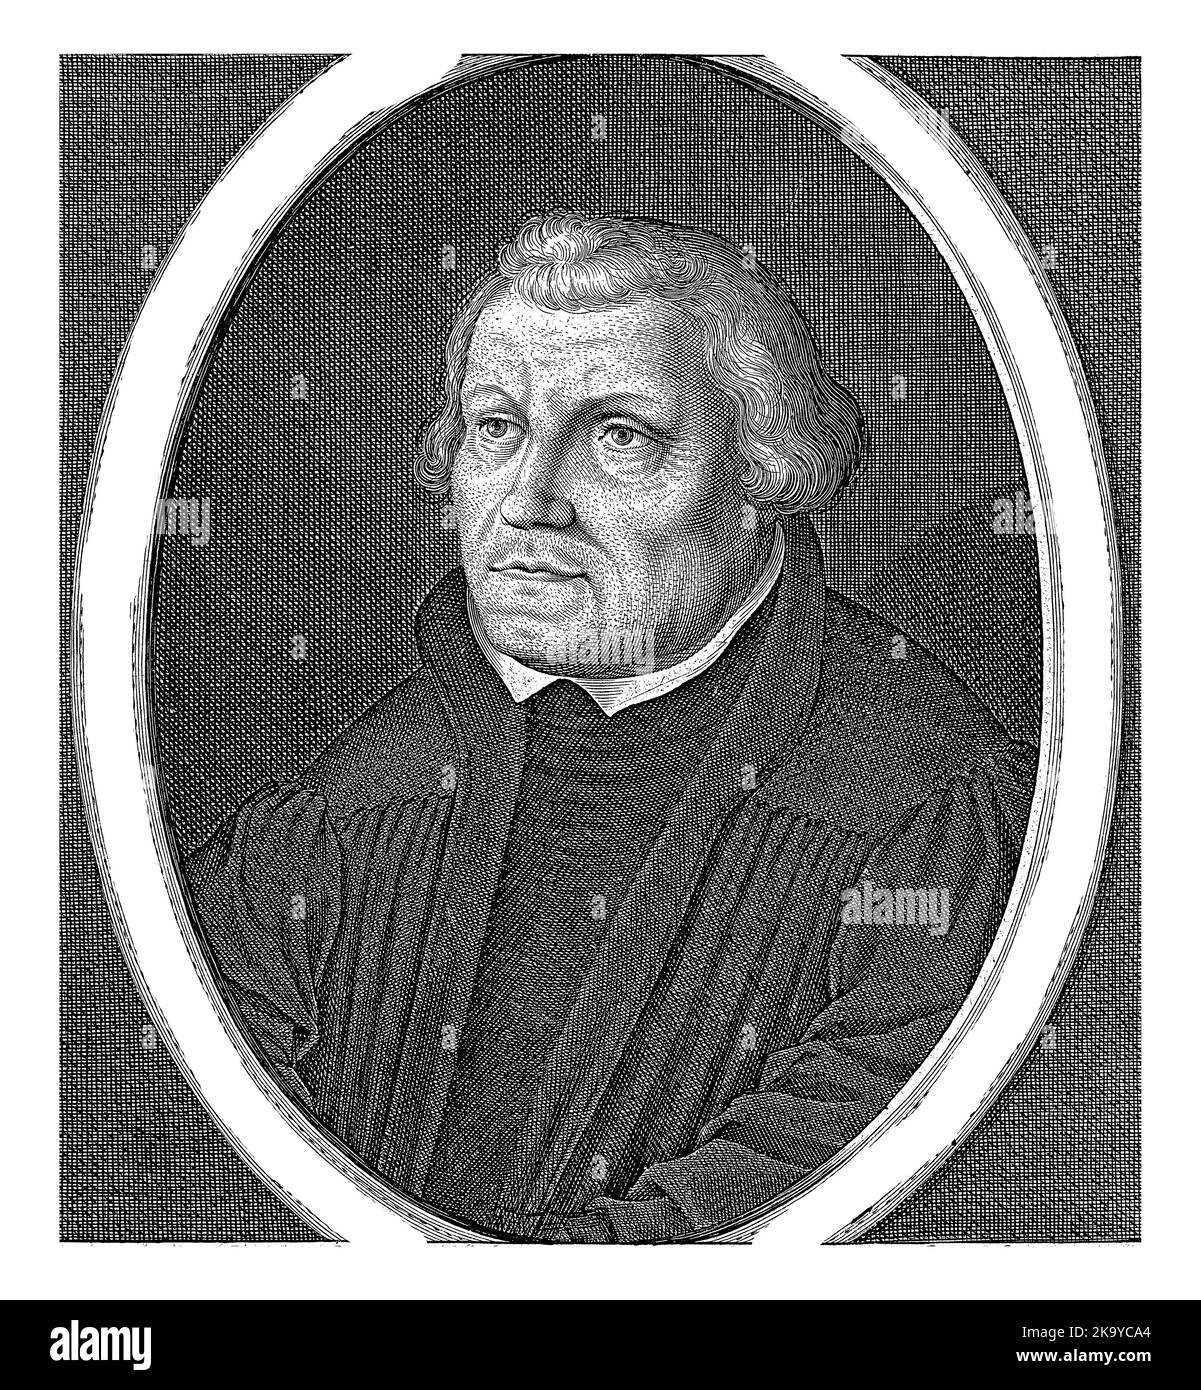 Bust of the theologian Martin Luther, facing left, in oval with edge lettering. Below the portrait is a Dutch verse by C. Victor. Stock Photo